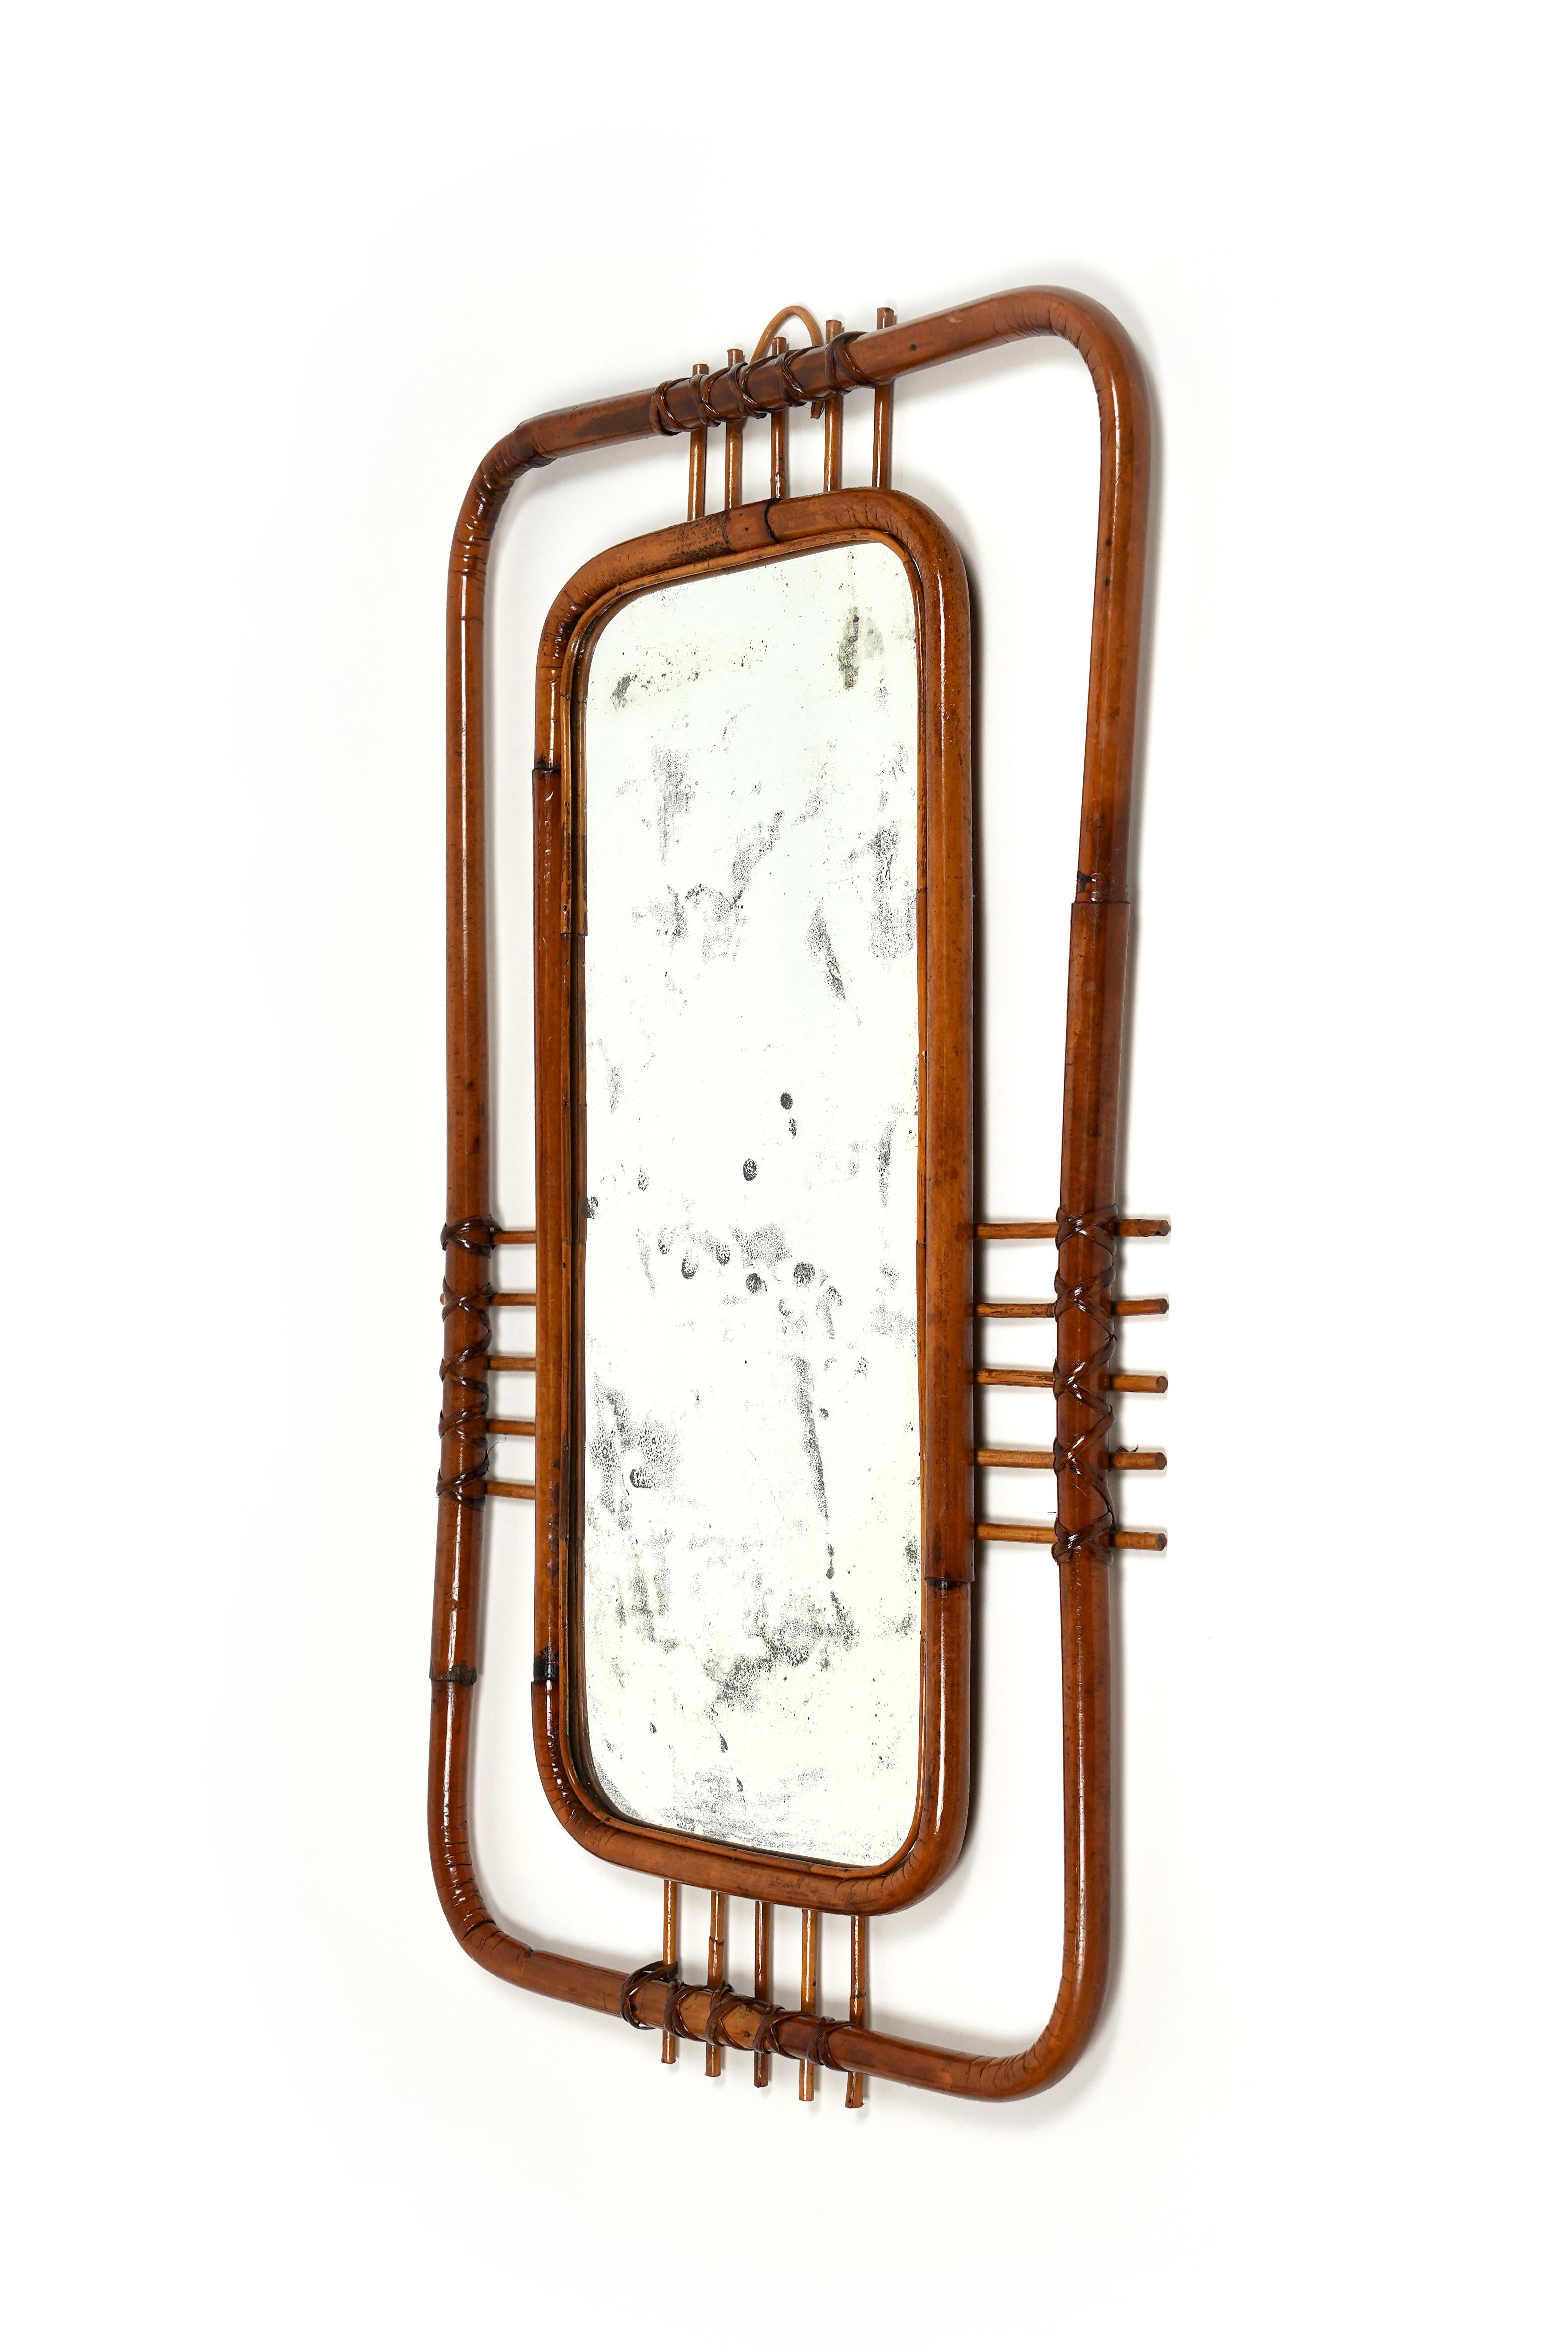 Italian Midcentury Bamboo and Rattan Geometric Wall Mirror, Italy, 1950s For Sale